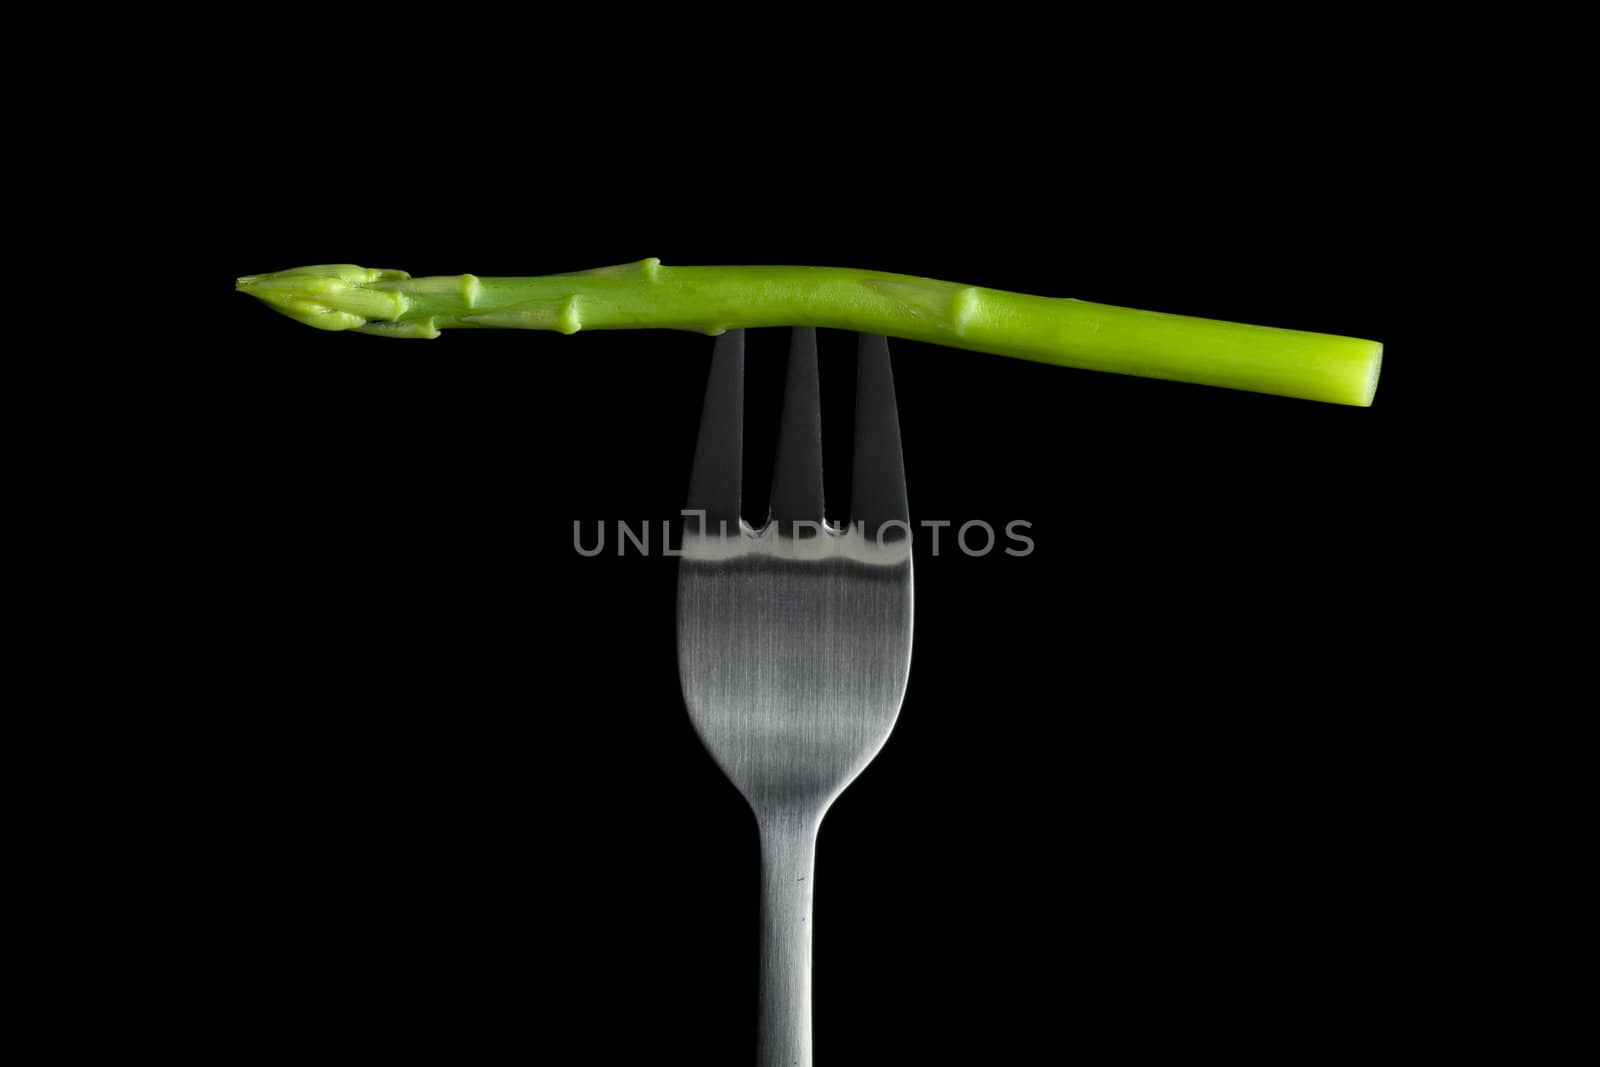 Raw asparagus on fork with black background.